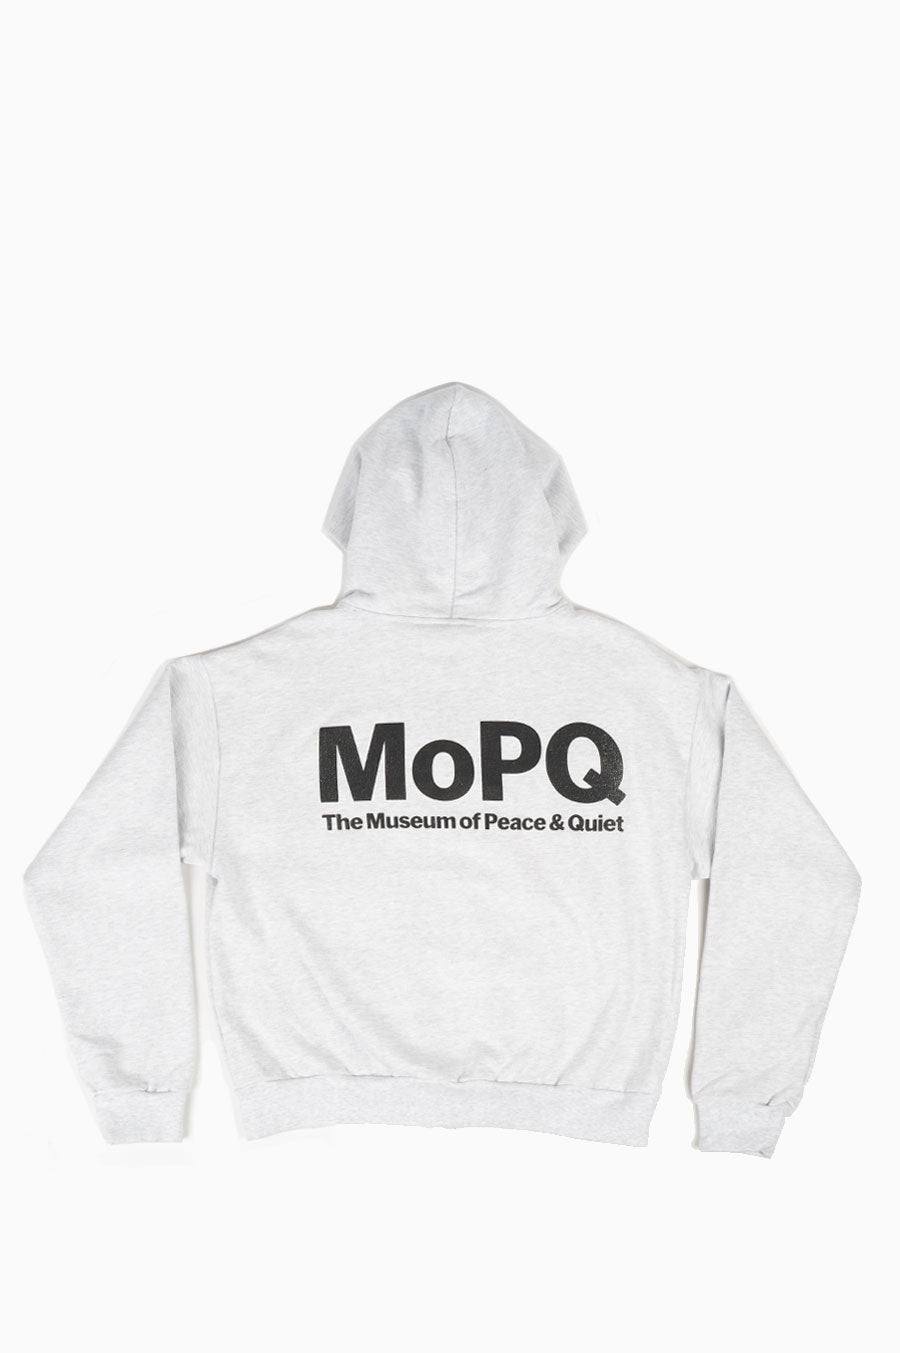 MUSEUM OF PEACE AND QUIET CONTEMPORARY MUSEUM ZIP UP HEATHER GREY